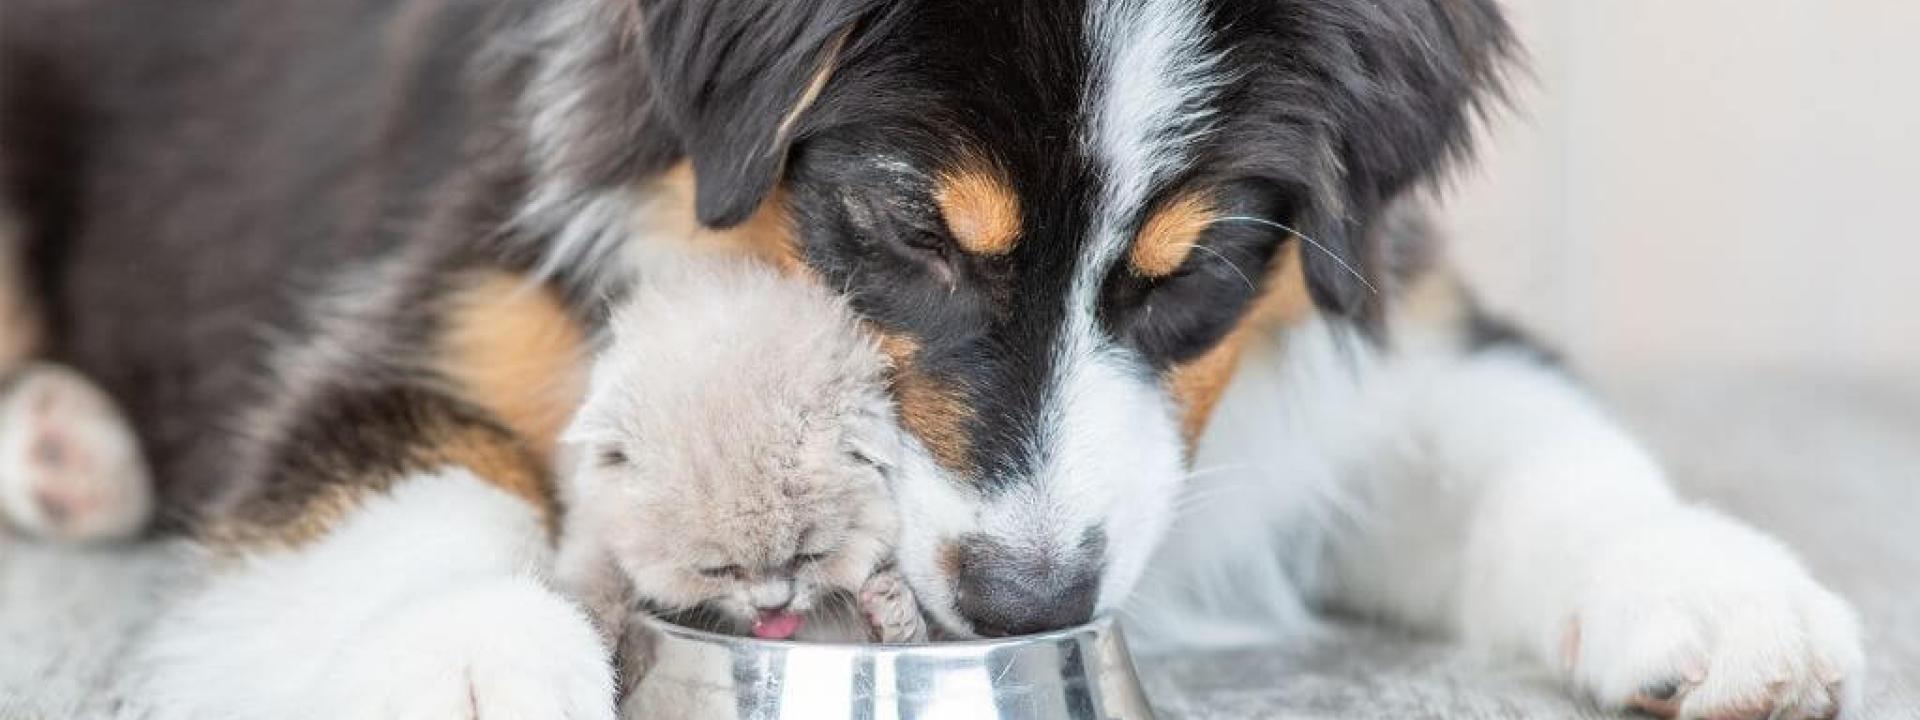 Dog and cat drinking water for hydration.